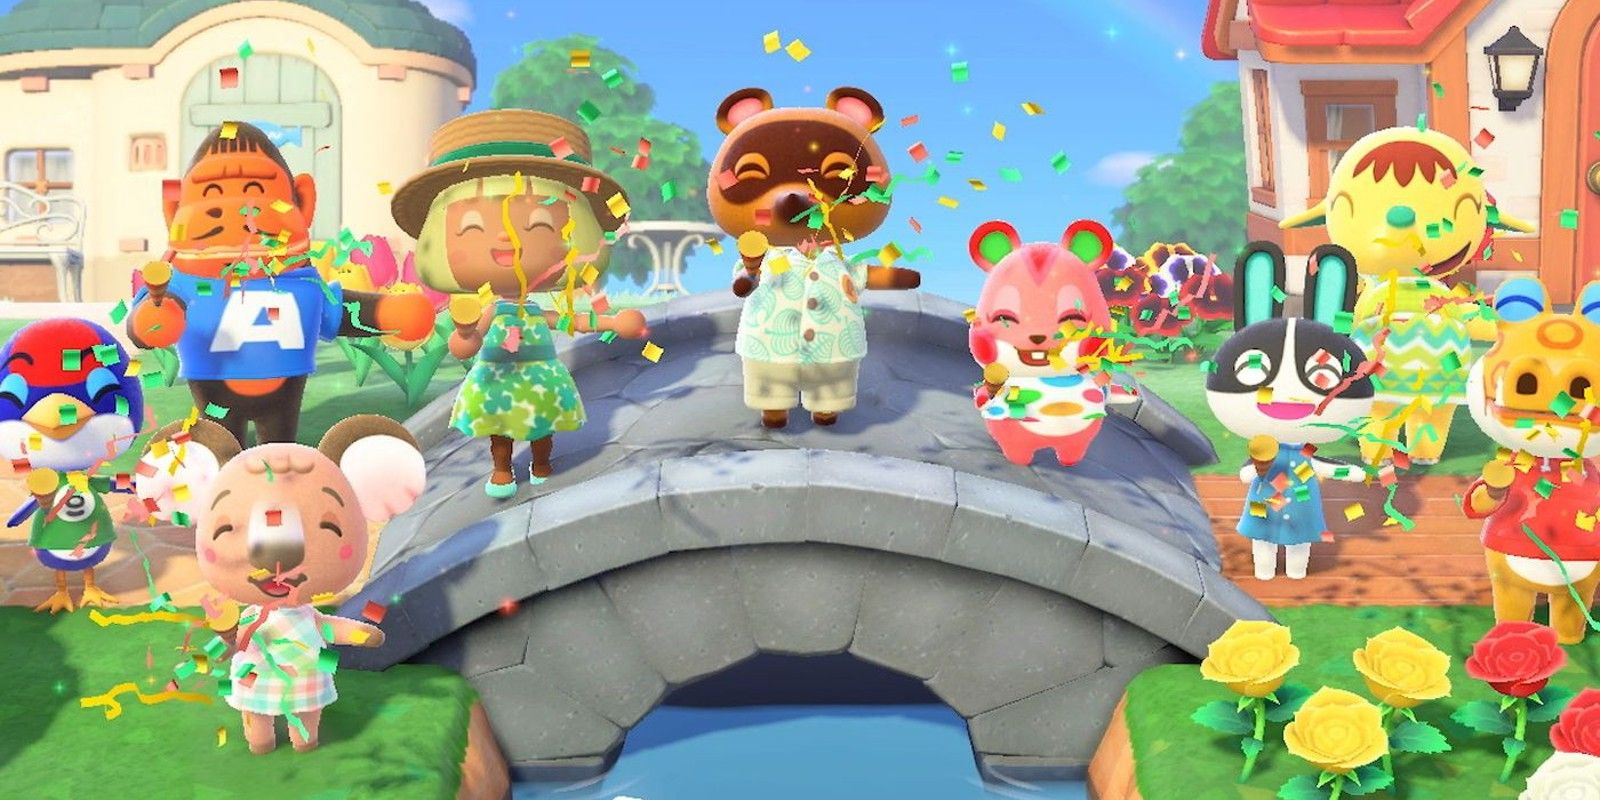 An image of a player celebrating the completion of a stone bridge with Tom Nook and various villagers in Animal Crossing: New Horizons.